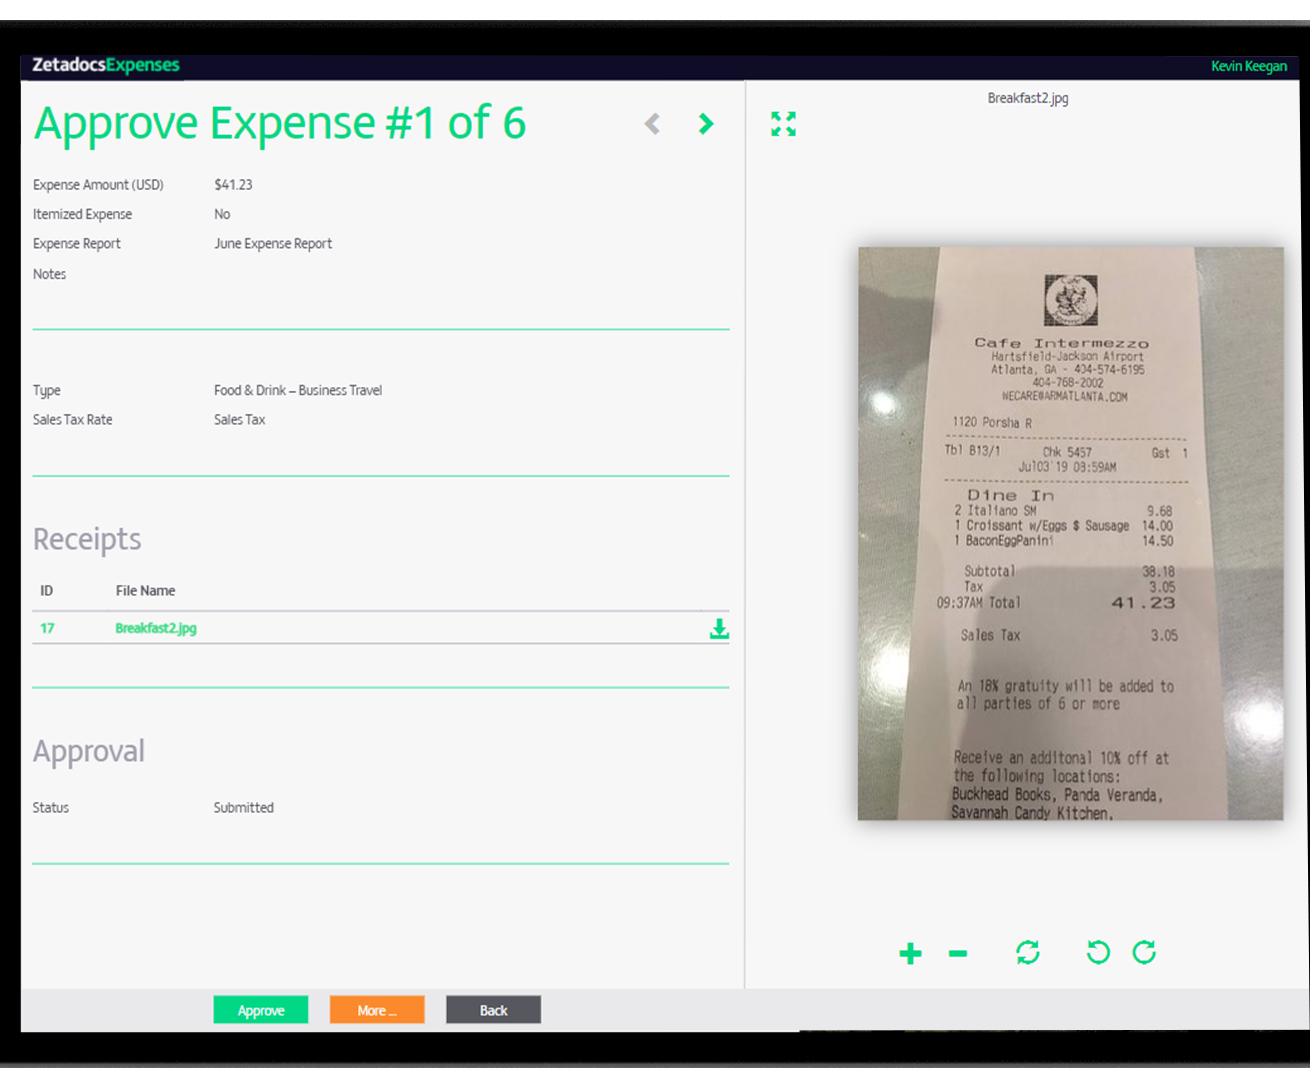 Approve: Zetadocs Expenses tracks expense limits so you don't have to: managers are notified to approve expense reports and the finance team makes a final check